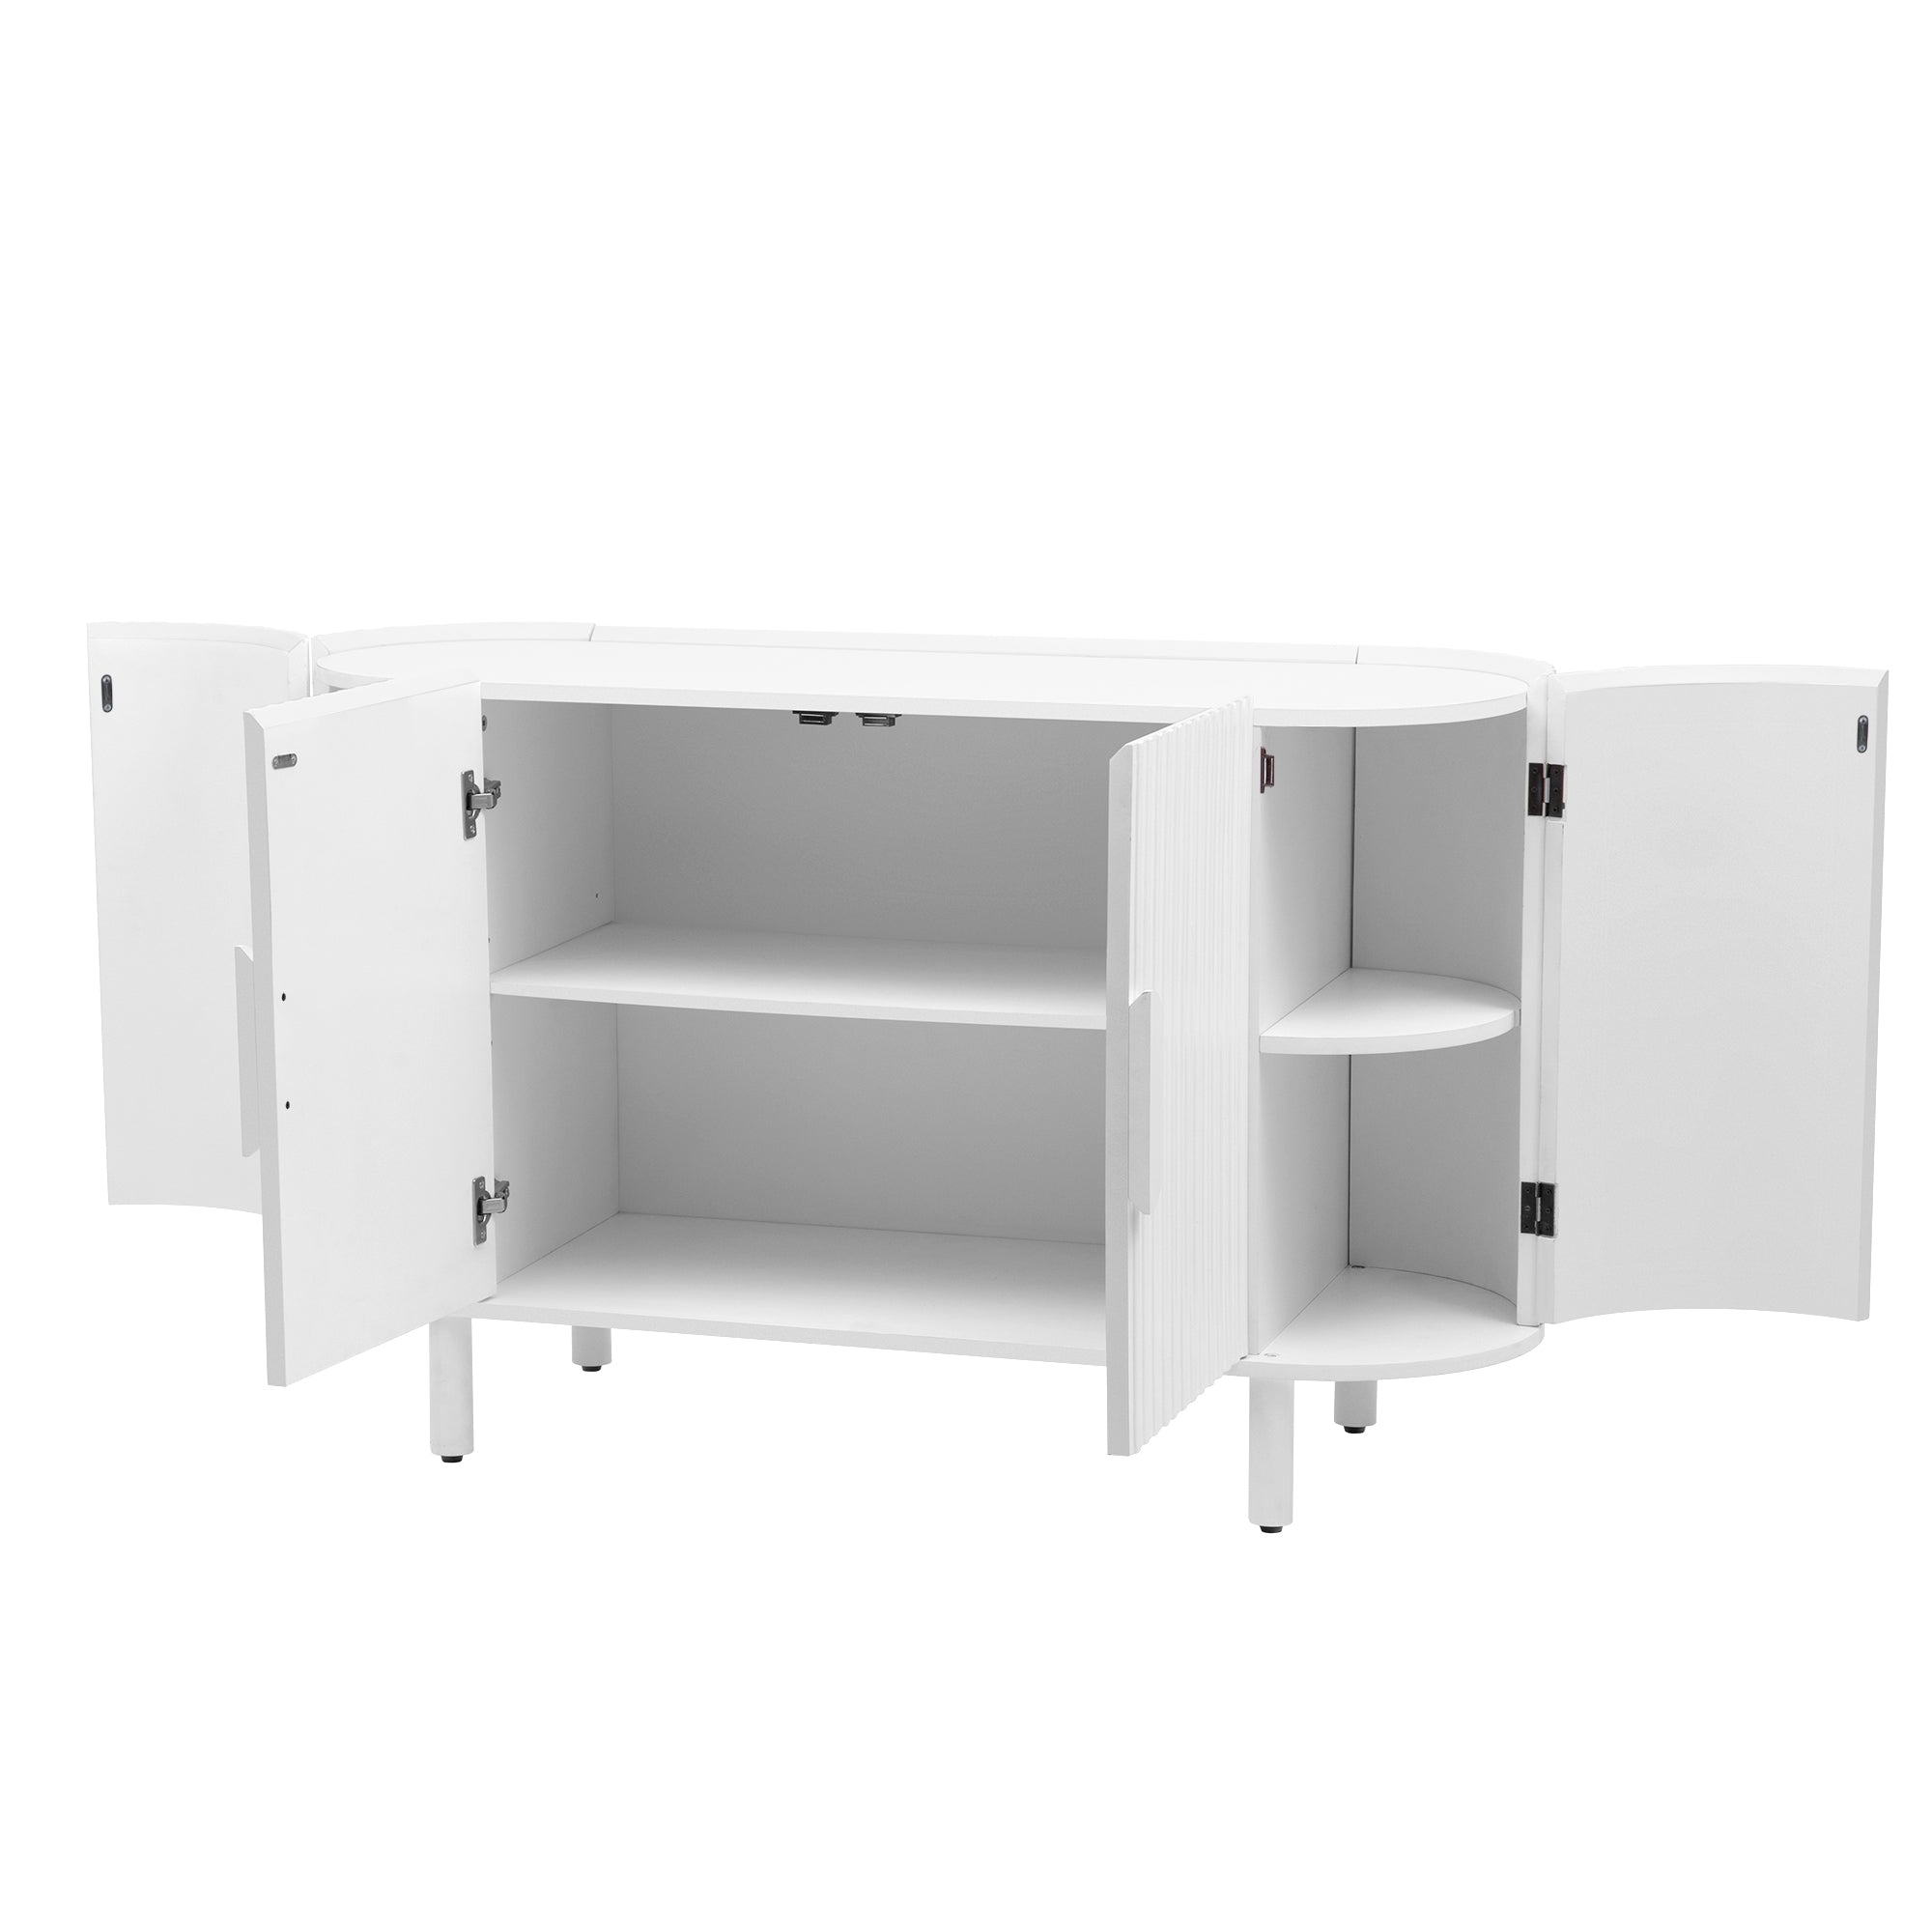 U Style Curved Design Light Luxury Sideboard with white-mdf